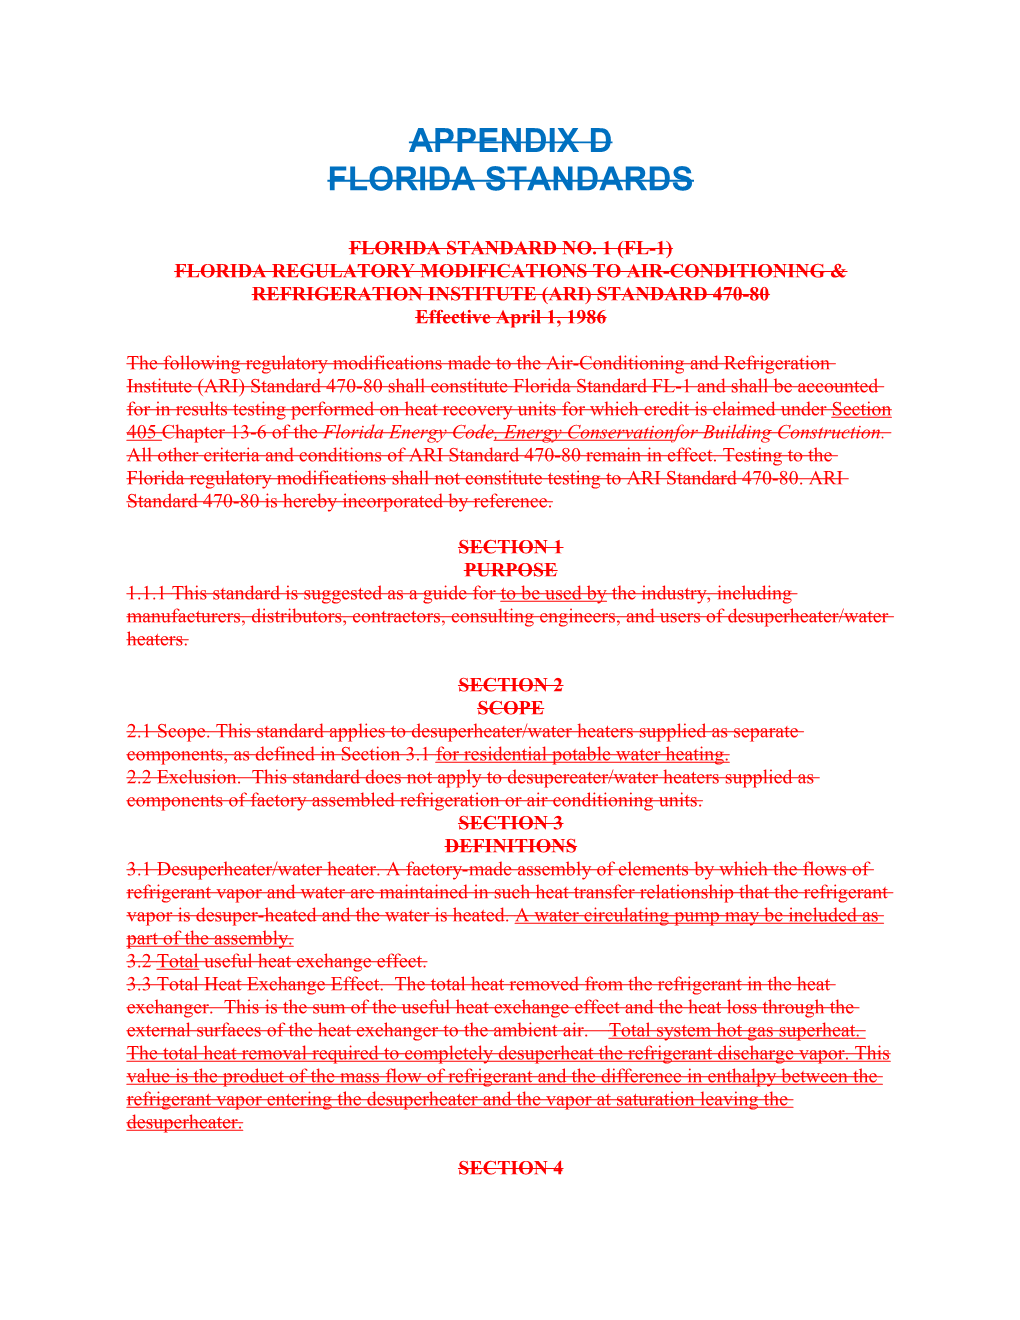 Florida Regulatory Modifications to Air-Conditioning &